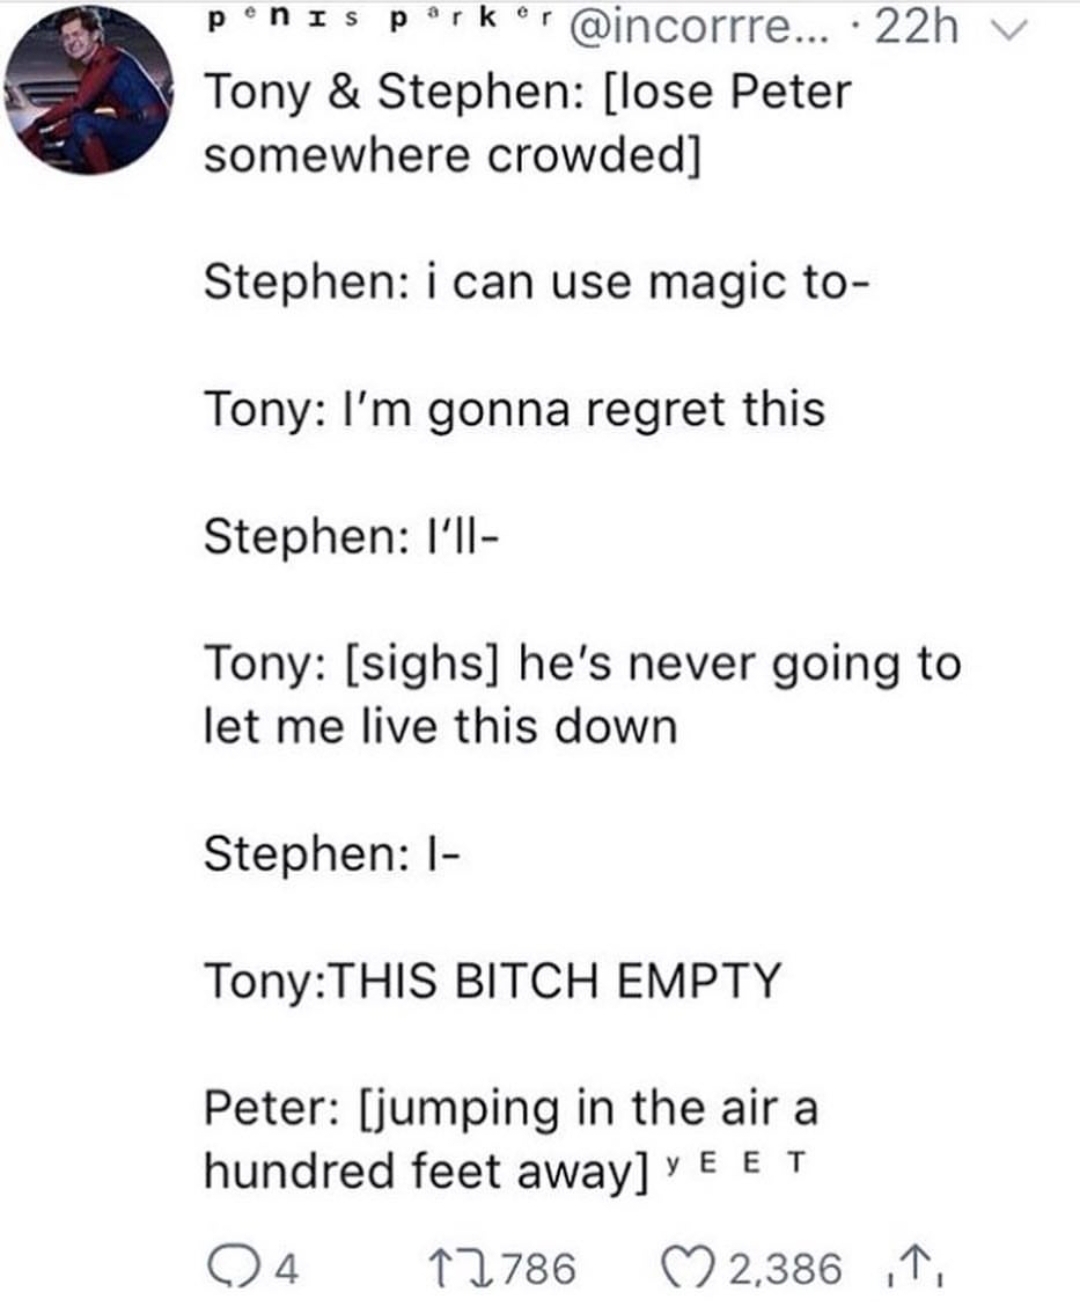 tumblr - document - en Is rk ponos pork or ... 22h Tony & Stephen lose Peter somewhere crowded Stephen i can use magic to Tony I'm gonna regret this Stephen I'll Tony sighs he's never going to let me live this down Stephen 1 TonyThis Bitch Empty Peter jum